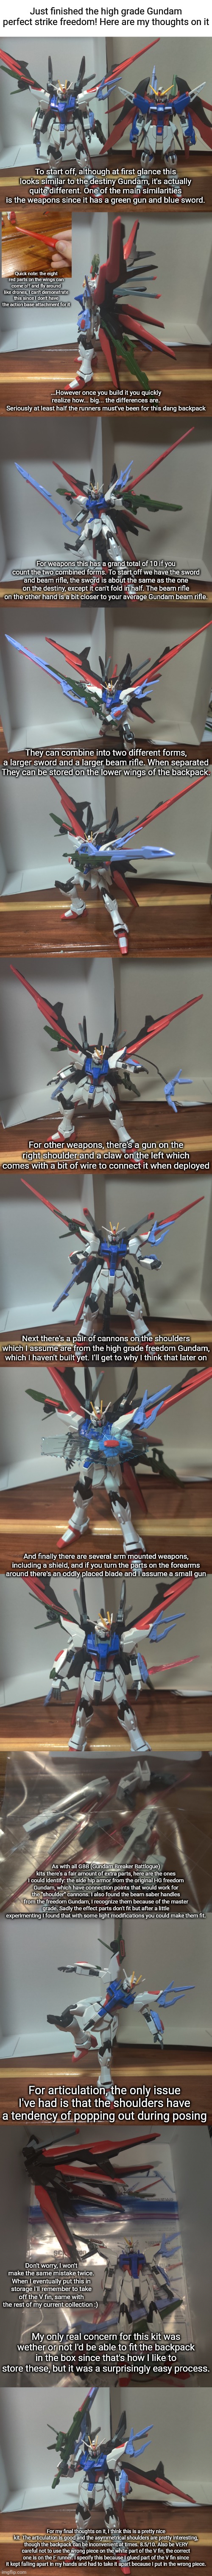 Now if you'll excuse me, I'll be avoiding new models like the plague until after Christmas. | Just finished the high grade Gundam perfect strike freedom! Here are my thoughts on it; To start off, although at first glance this looks similar to the destiny Gundam, it's actually quite different. One of the main similarities is the weapons since it has a green gun and blue sword. Quick note: the eight red parts on the wings can come off and fly around like drones, I can't demonstrate this since I don't have the action base attachment for it; ...However once you build it you quickly realize how... big... the differences are.
Seriously at least half the runners must've been for this dang backpack; For weapons this has a grand total of 10 if you count the two combined forms. To start off we have the sword and beam rifle, the sword is about the same as the one on the destiny, except it can't fold in half. The beam rifle on the other hand is a bit closer to your average Gundam beam rifle. They can combine into two different forms, a larger sword and a larger beam rifle. When separated They can be stored on the lower wings of the backpack. For other weapons, there's a gun on the right shoulder and a claw on the left which comes with a bit of wire to connect it when deployed; Next there's a pair of cannons on the shoulders which I assume are from the high grade freedom Gundam, which I haven't built yet. I'll get to why I think that later on; And finally there are several arm mounted weapons, including a shield, and if you turn the parts on the forearms around there's an oddly placed blade and I assume a small gun; As with all GBB (Gundam Breaker Battlogue) kits there's a fair amount of extra parts, here are the ones I could identify: the side hip armor from the original HG freedom Gundam, which have connection points that would work for the "shoulder" cannons. I also found the beam saber handles from the freedom Gundam, I recognize them because of the master grade. Sadly the effect parts don't fit but after a little experimenting I found that with some light modifications you could make them fit. For articulation, the only issue I've had is that the shoulders have a tendency of popping out during posing; Don't worry, I won't make the same mistake twice. When I eventually put this in storage I'll remember to take off the V fin, same with the rest of my current collection :); My only real concern for this kit was wether or not I'd be able to fit the backpack in the box since that's how I like to store these, but it was a surprisingly easy process. For my final thoughts on it, I think this is a pretty nice kit. The articulation is good and the asymmetrical shoulders are pretty interesting, though the backpack can be inconvenient at times. 8.5/10. Also be VERY careful not to use the wrong piece on the white part of the V fin, the correct one is on the F runner. I specify this because I glued part of the V fin since it kept falling apart in my hands and had to take it apart because I put in the wrong piece. | image tagged in blank white template,gundam review | made w/ Imgflip meme maker